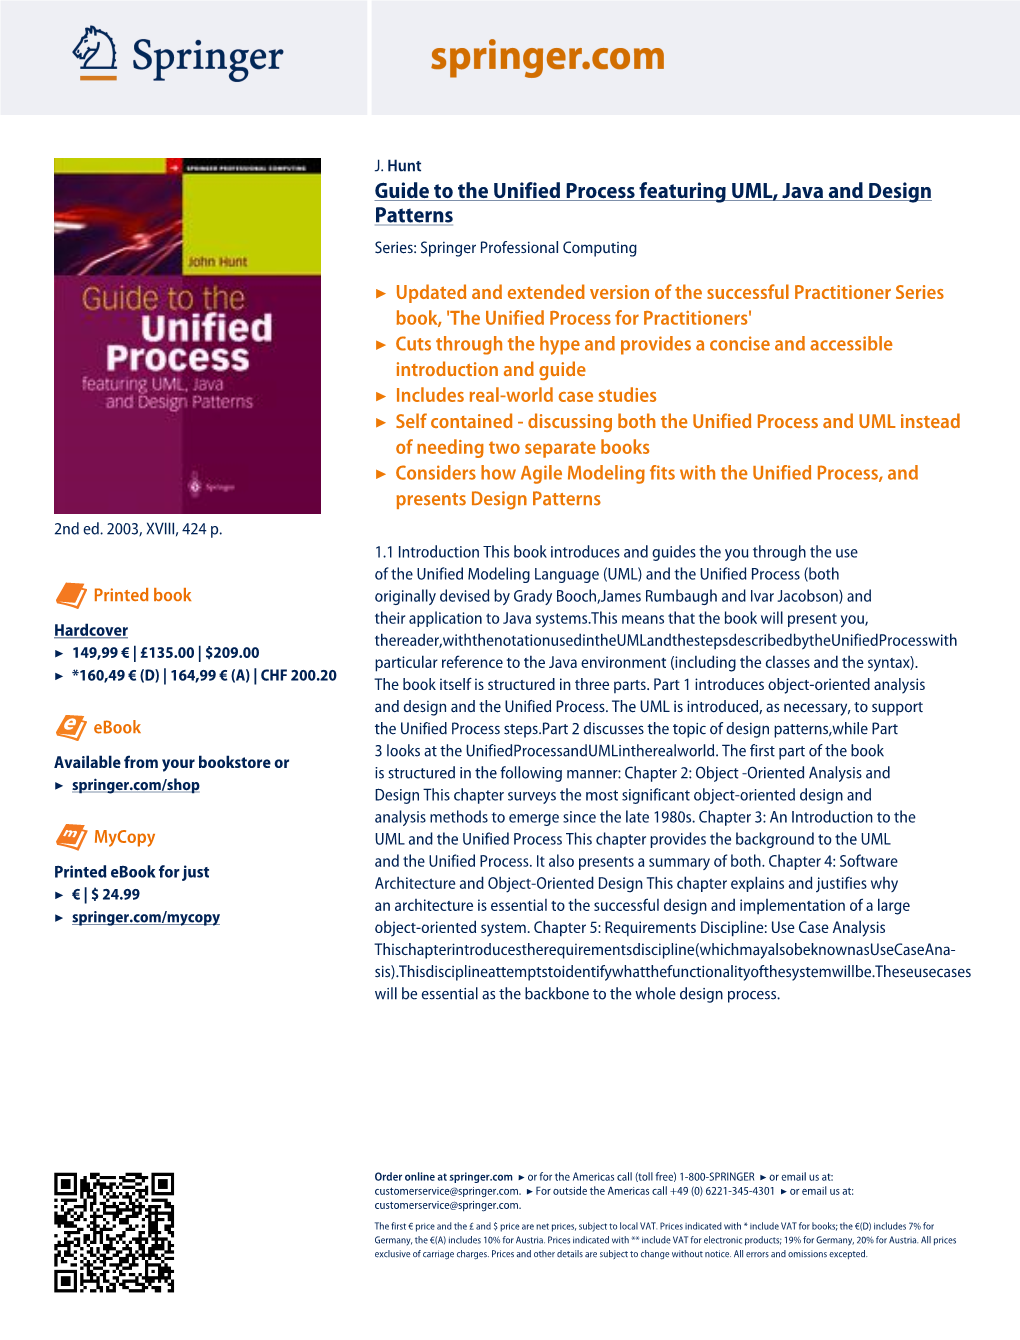 Guide to the Unified Process Featuring UML, Java and Design Patterns Series: Springer Professional Computing